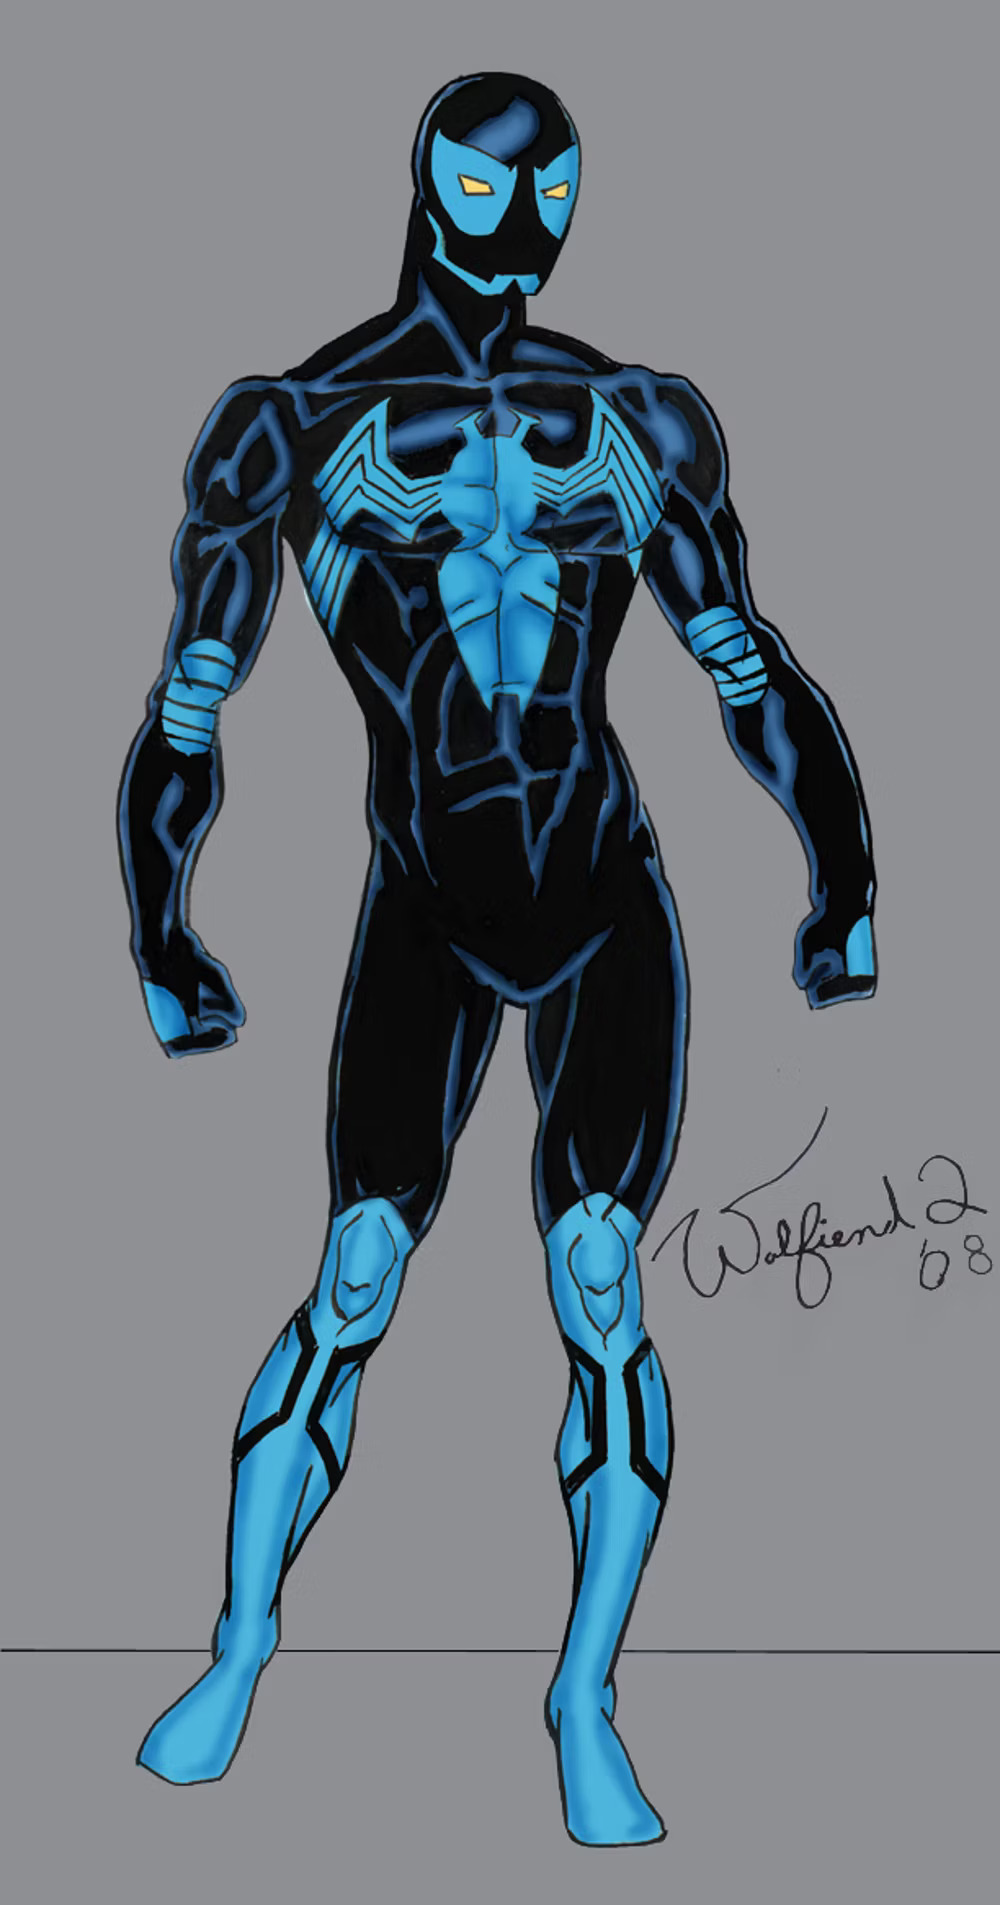 Blue Beetle And Spiderman character by Walfiend